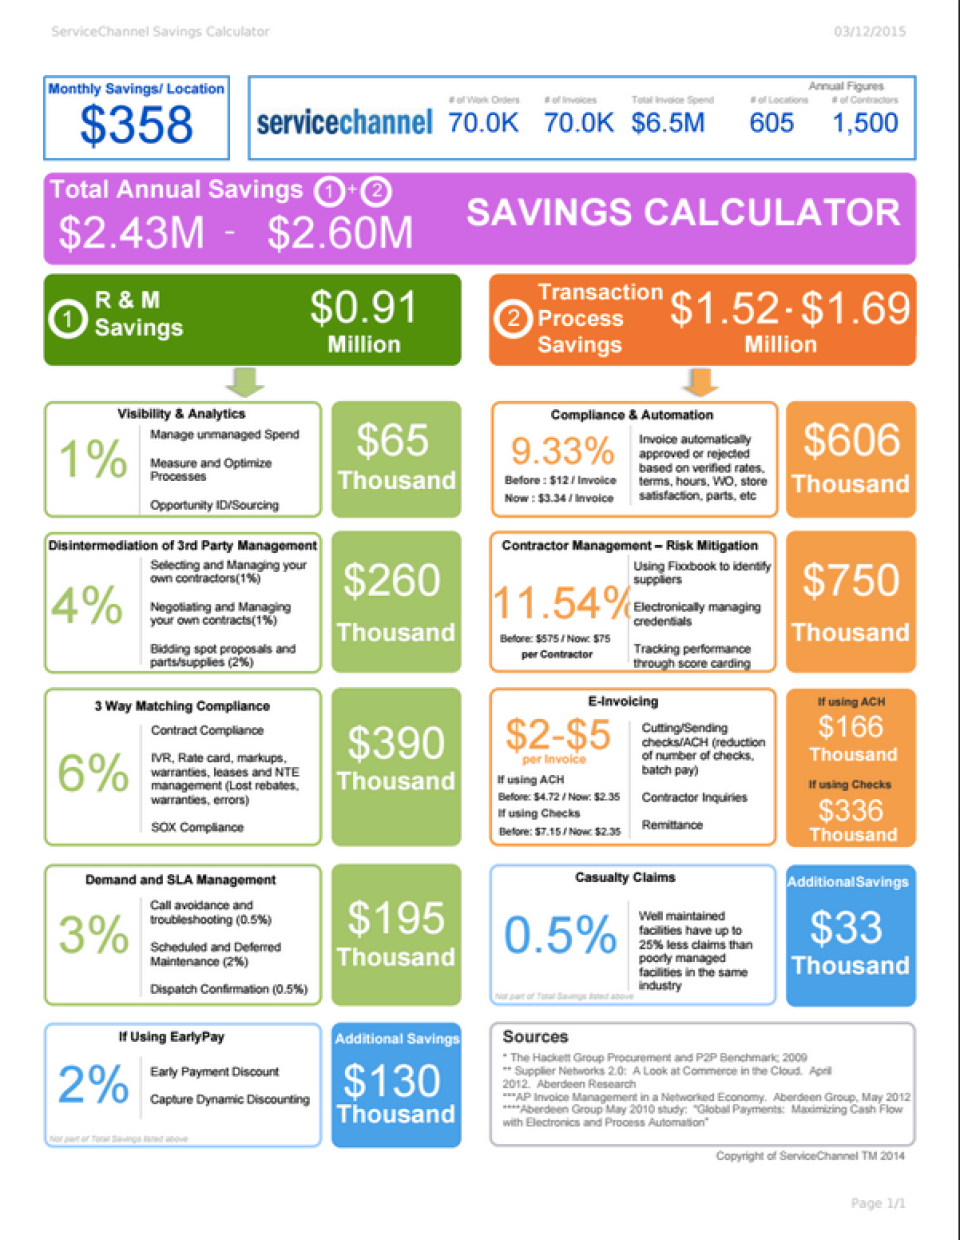 ServiceChannel Software - The savings calculator provides insight on monthly and annual savings